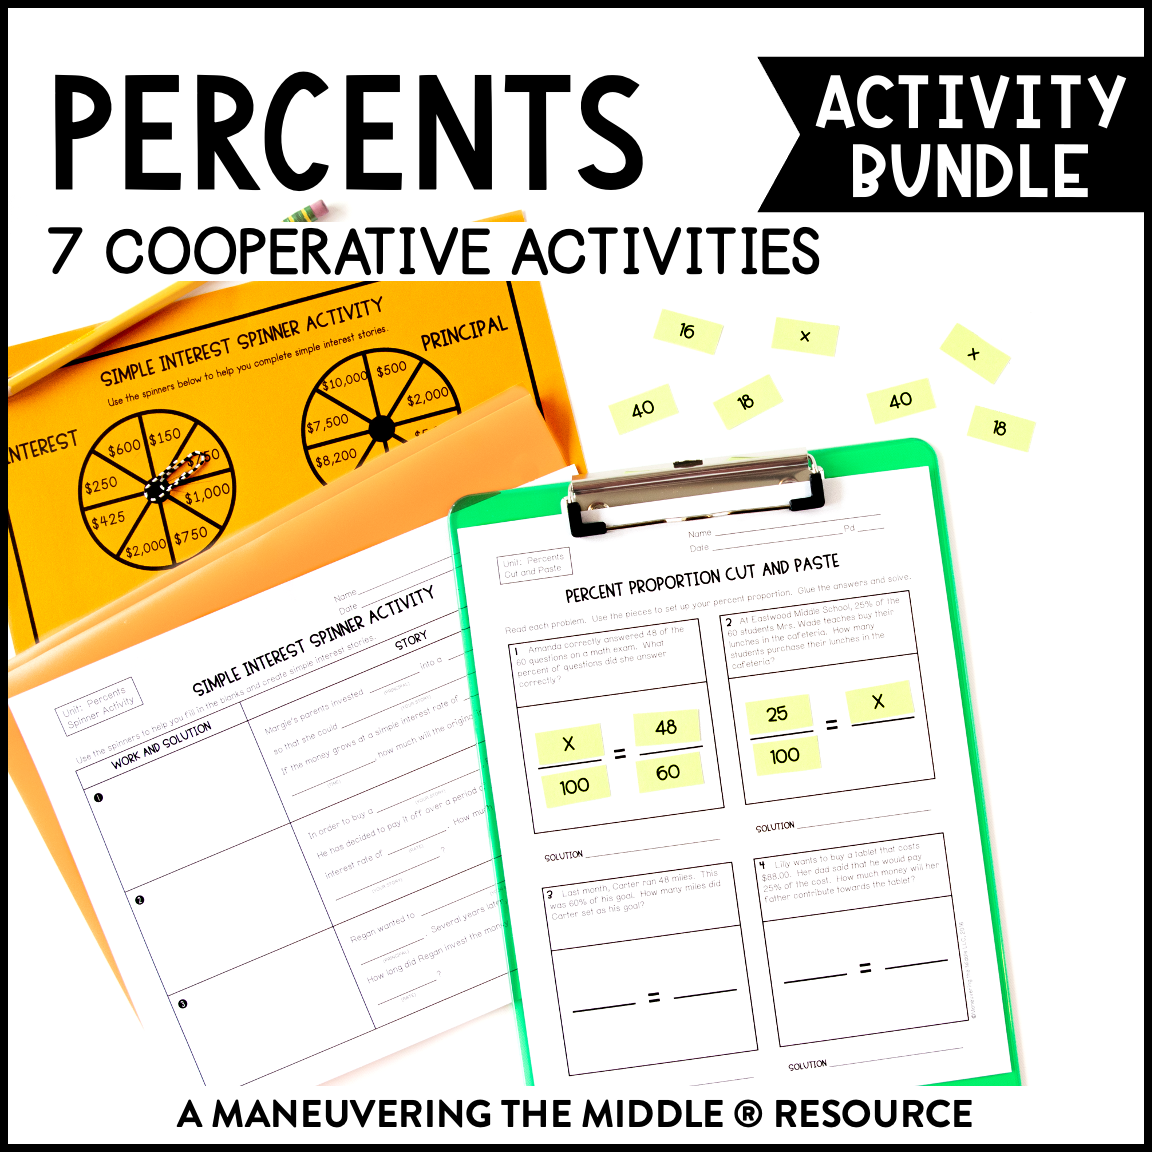 7th-Grade Percents Activity Bundle - 6 activities to support real-life proportions, percent problems, percent of change, percent error, and simple interest. | maneuveringthemiddle.com